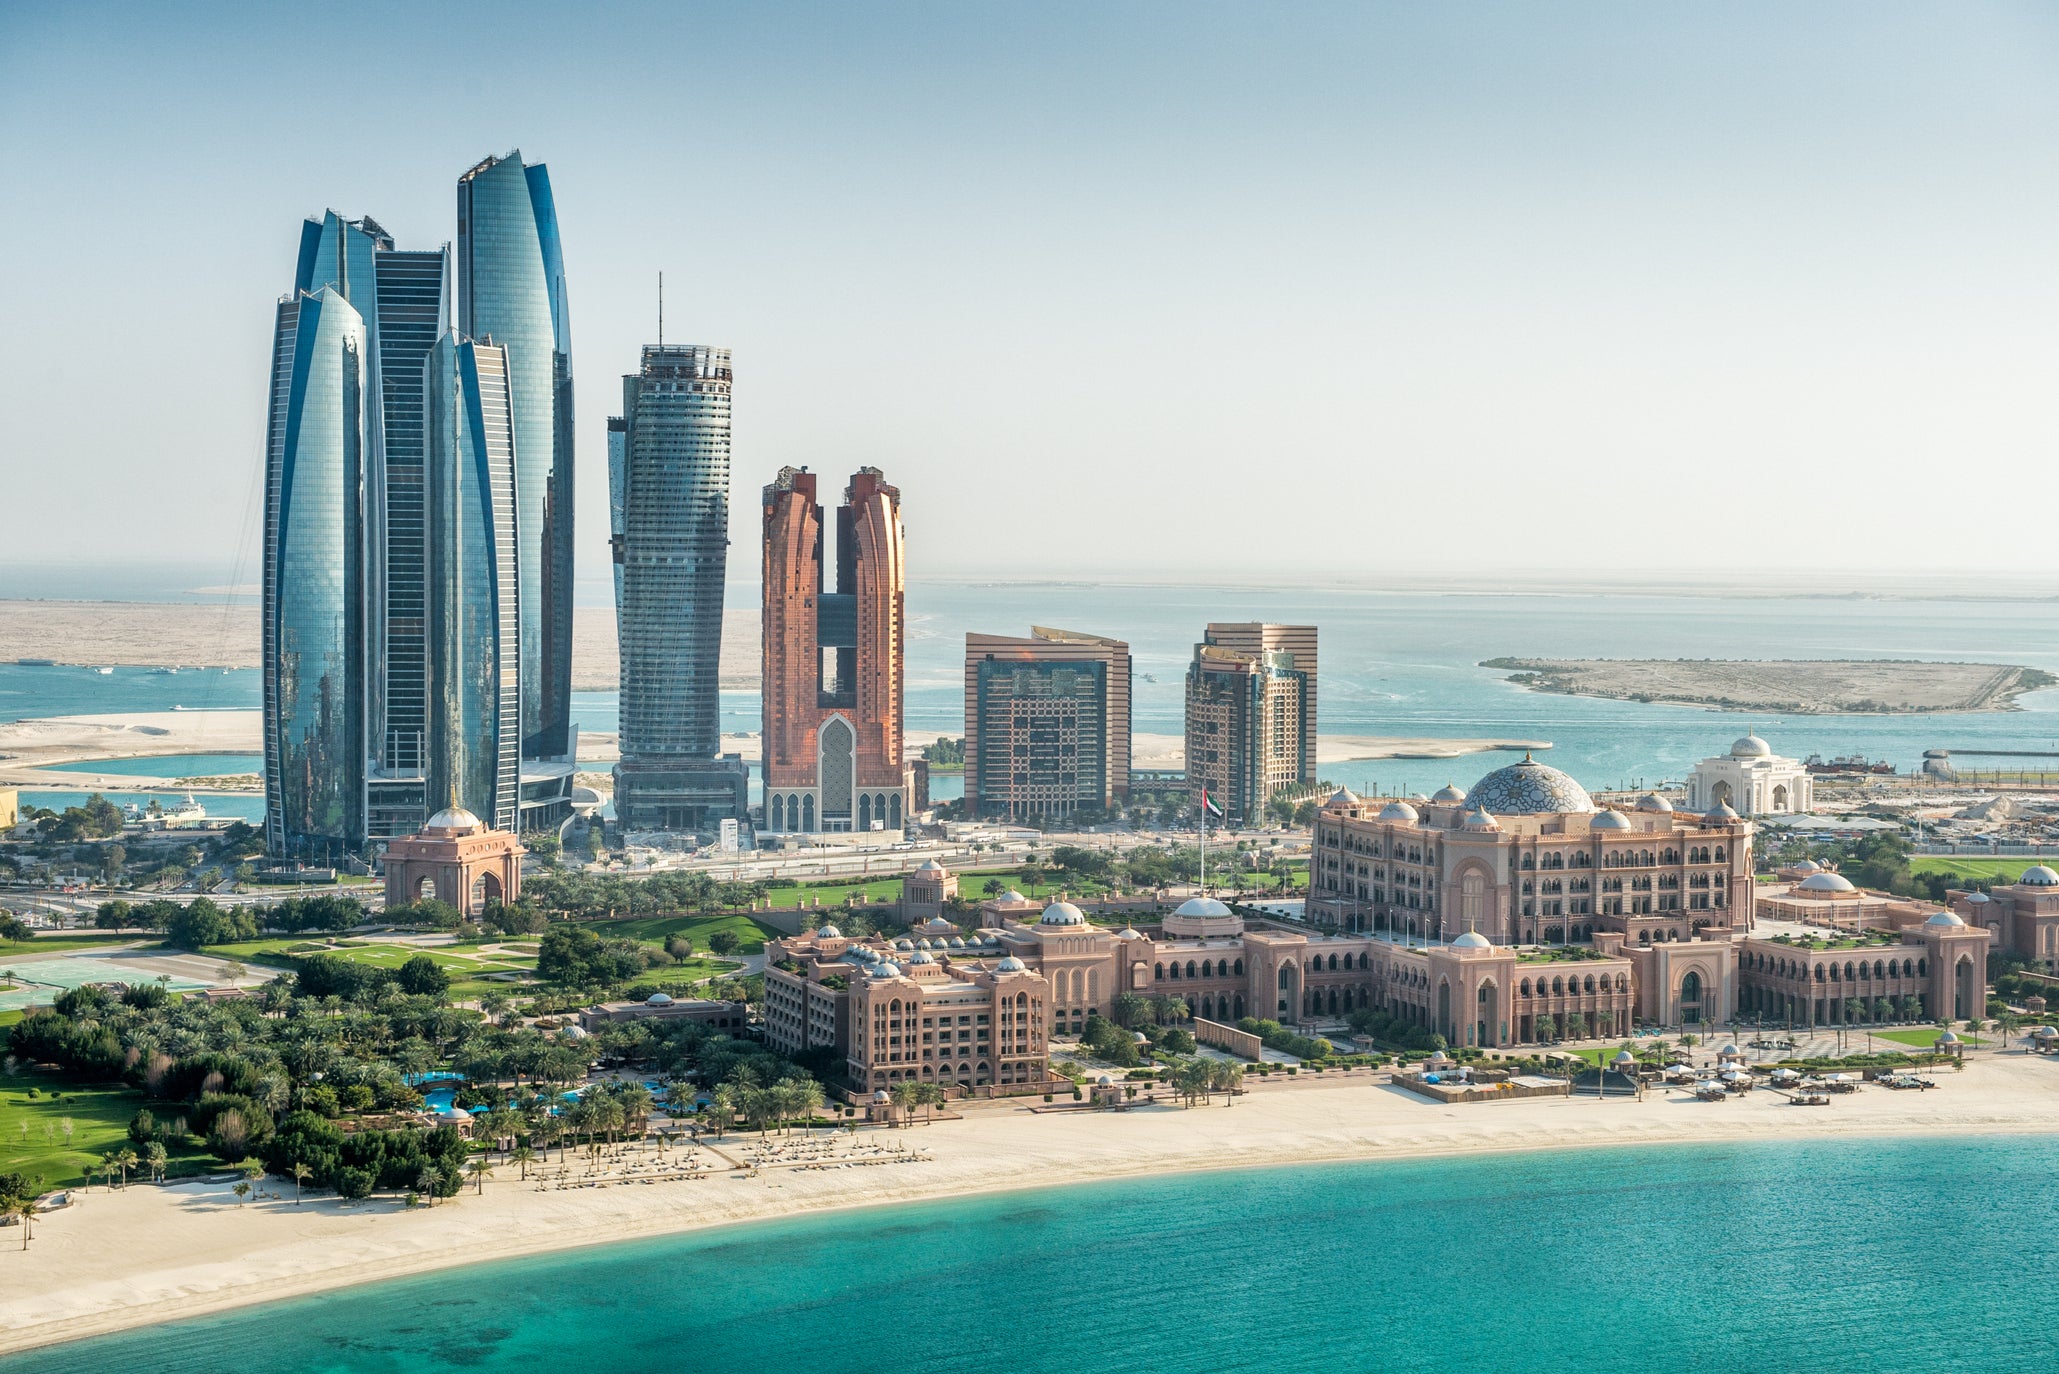 There’s plenty to discover in the modern city of Abu Dhabi